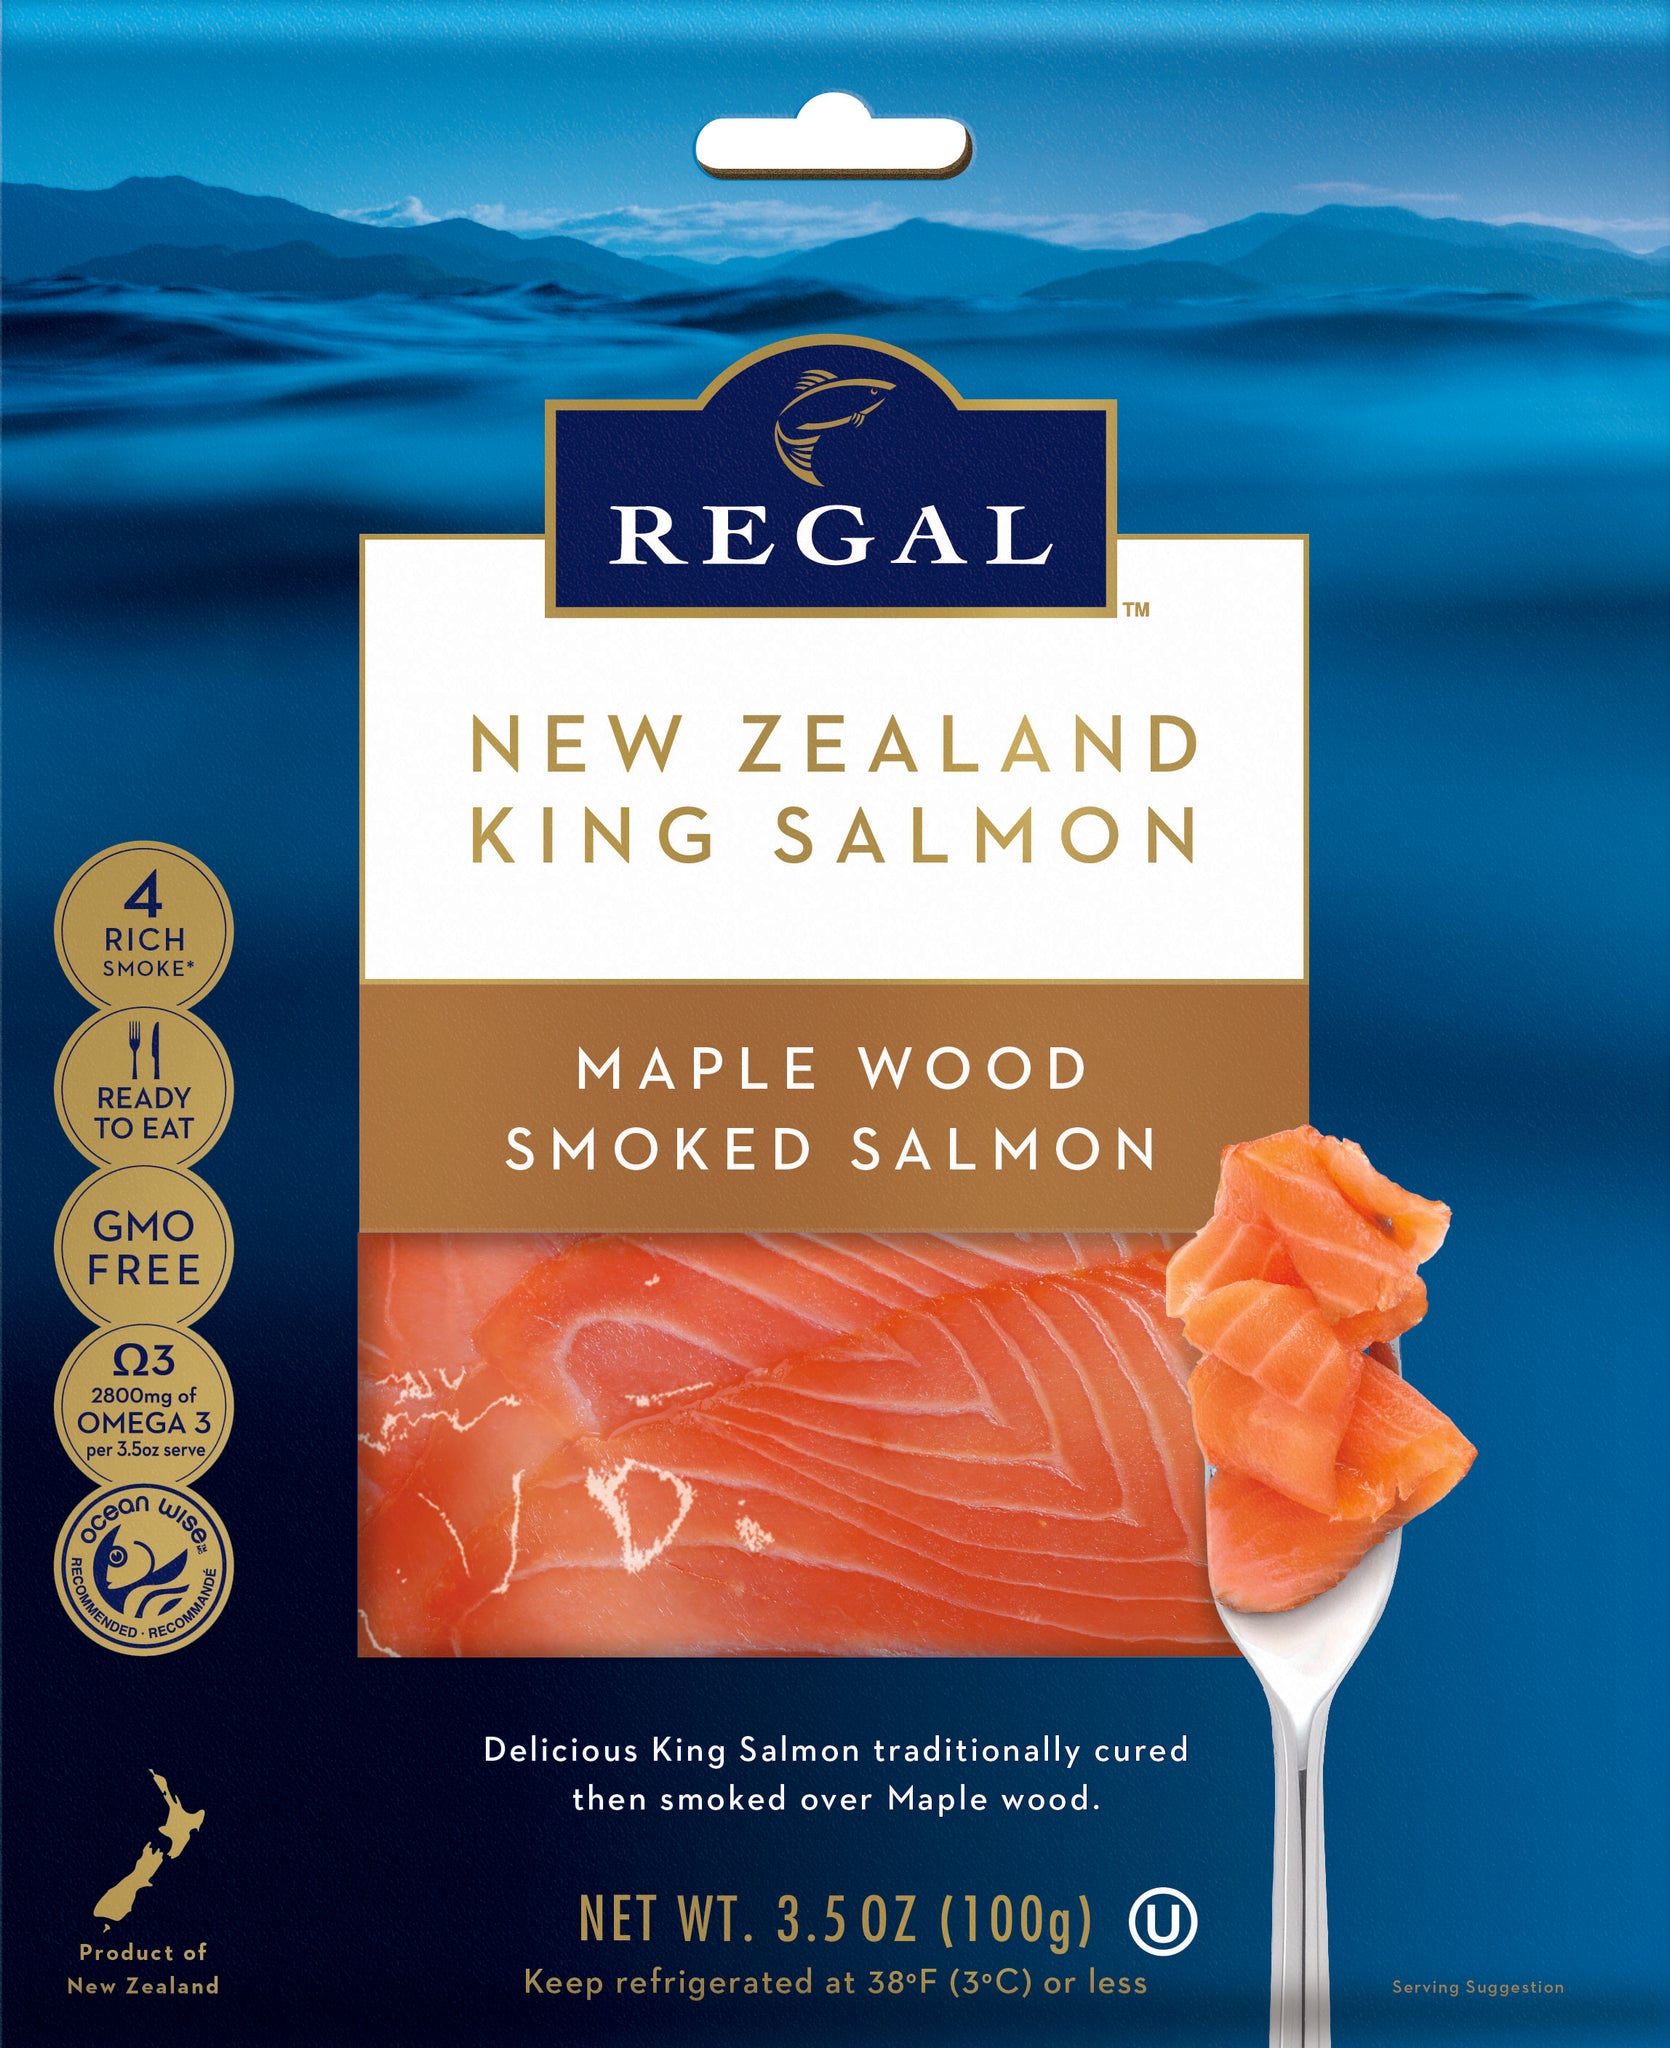 Smoked King Salmon (Maple Wood) by Regal